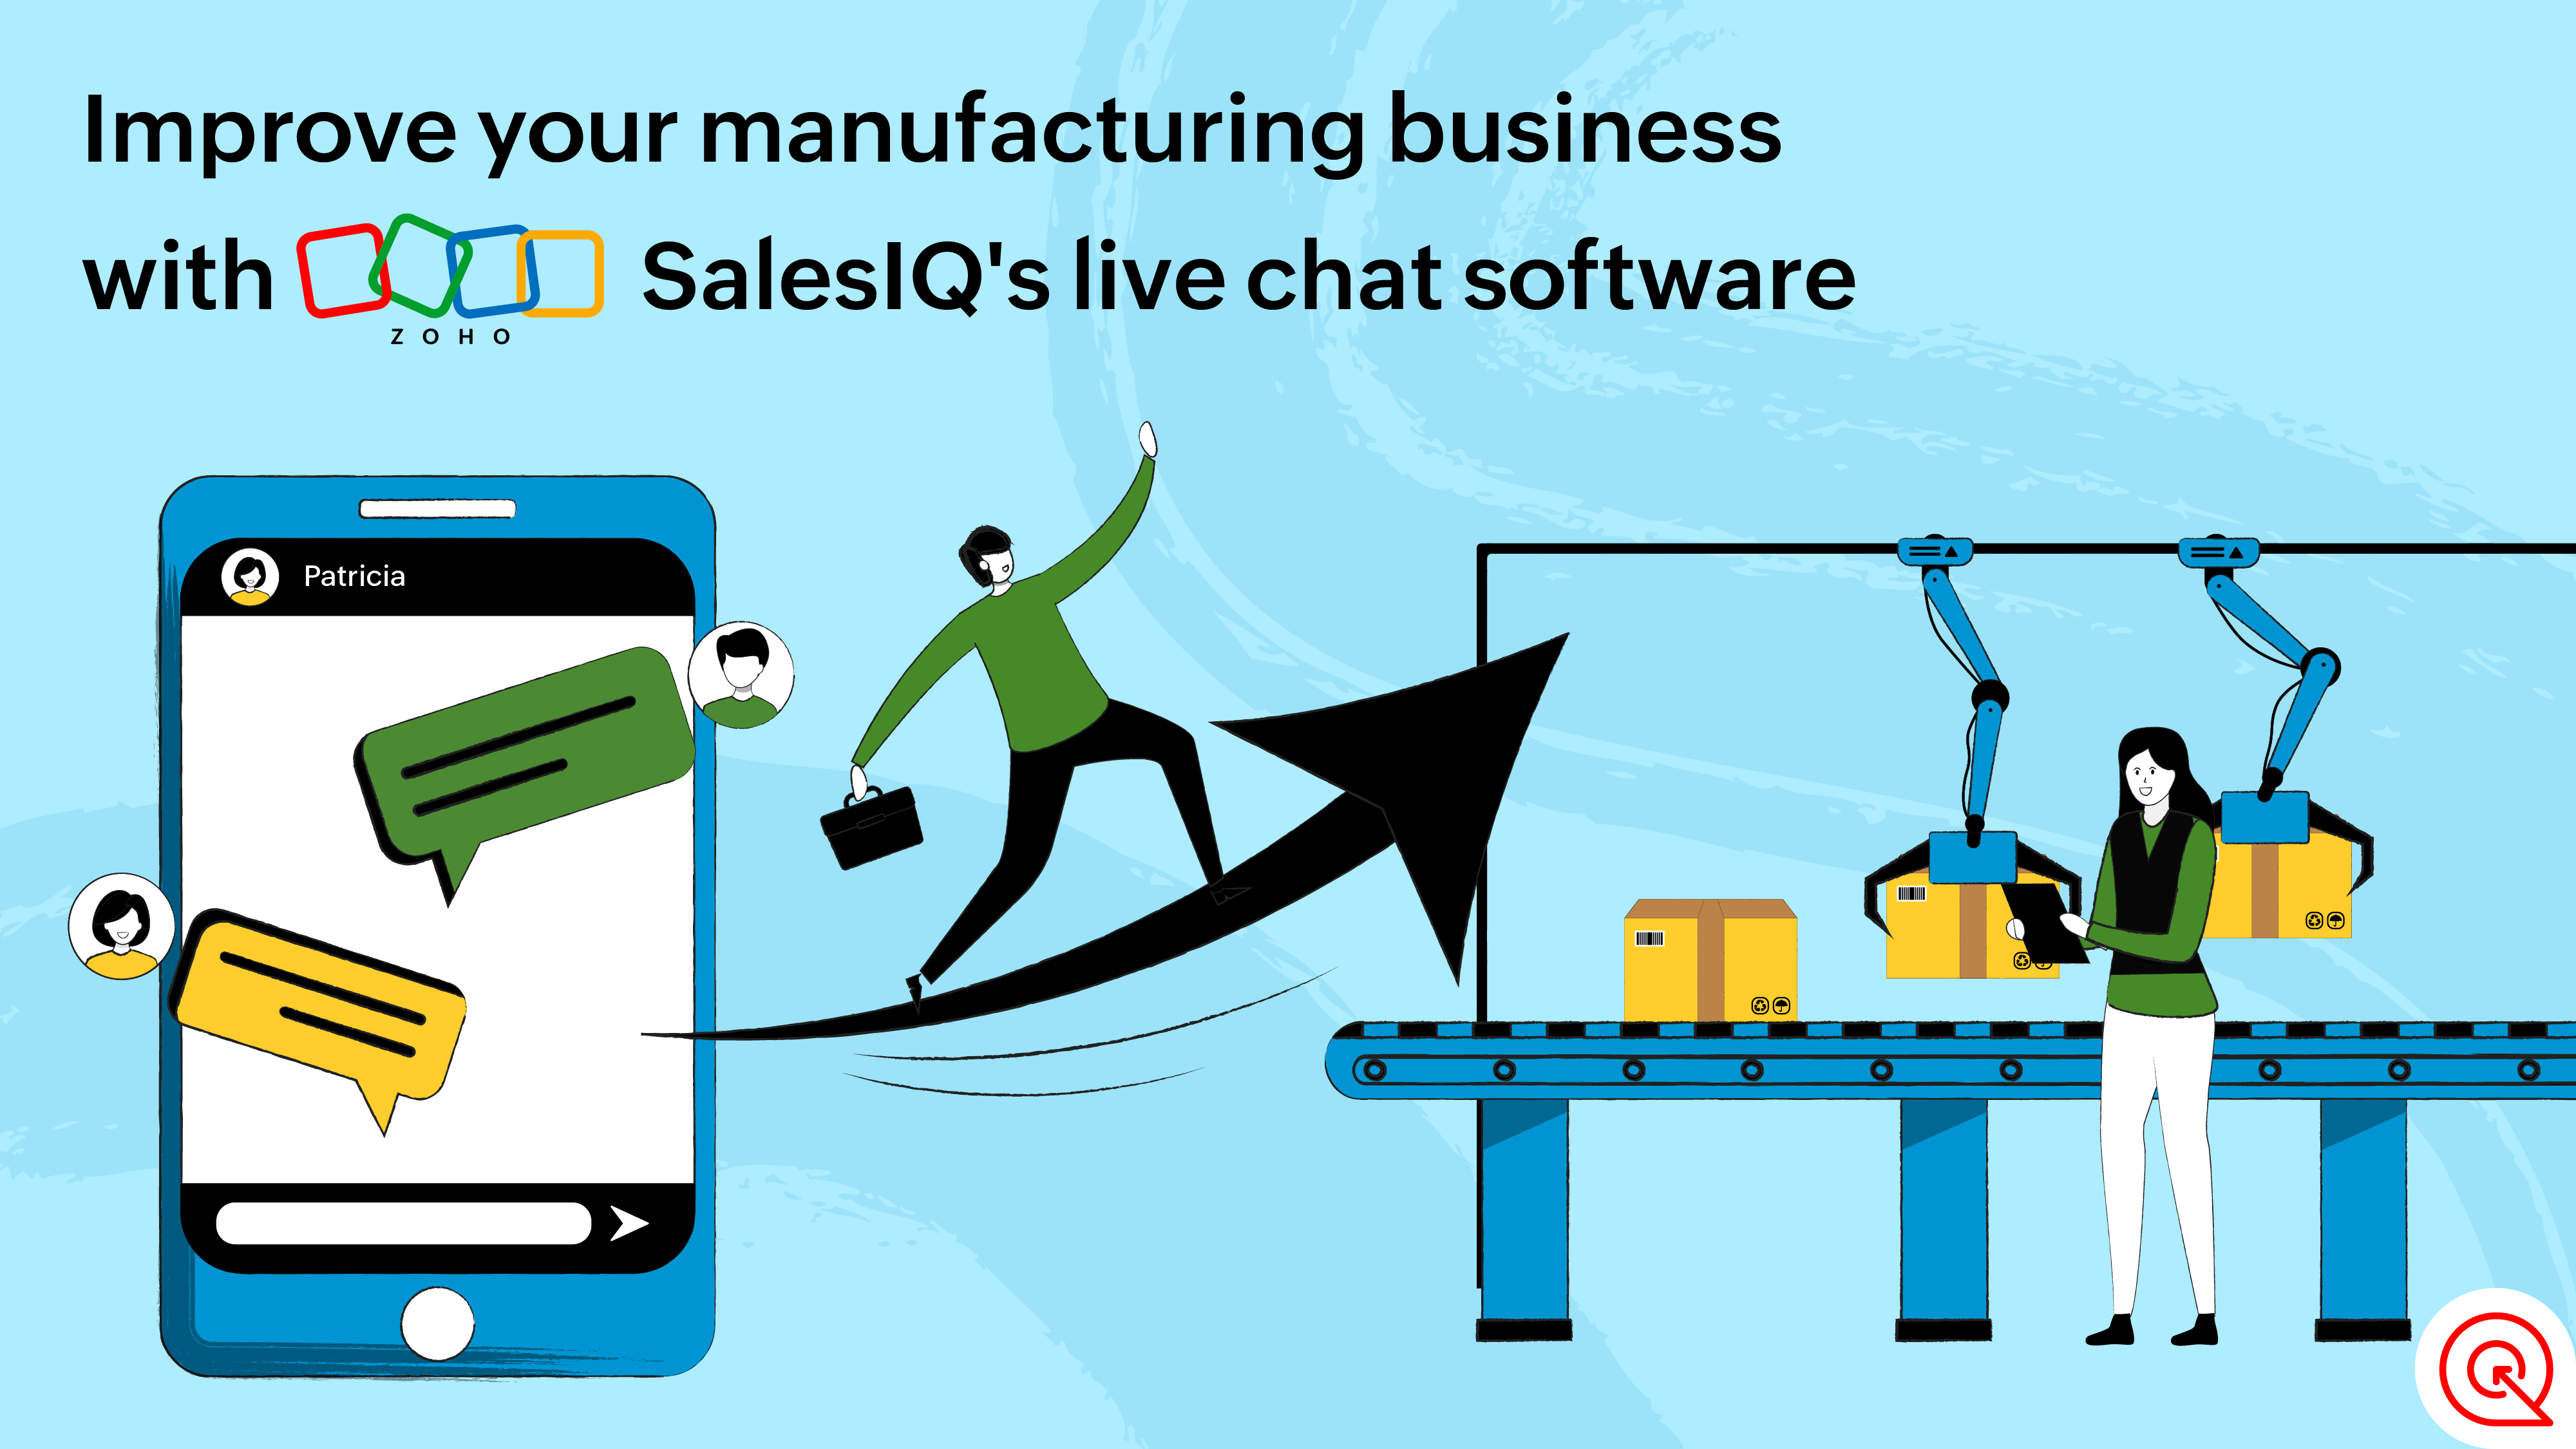 Improve your manufacturing business with Zoho SalesIQ's live chat software